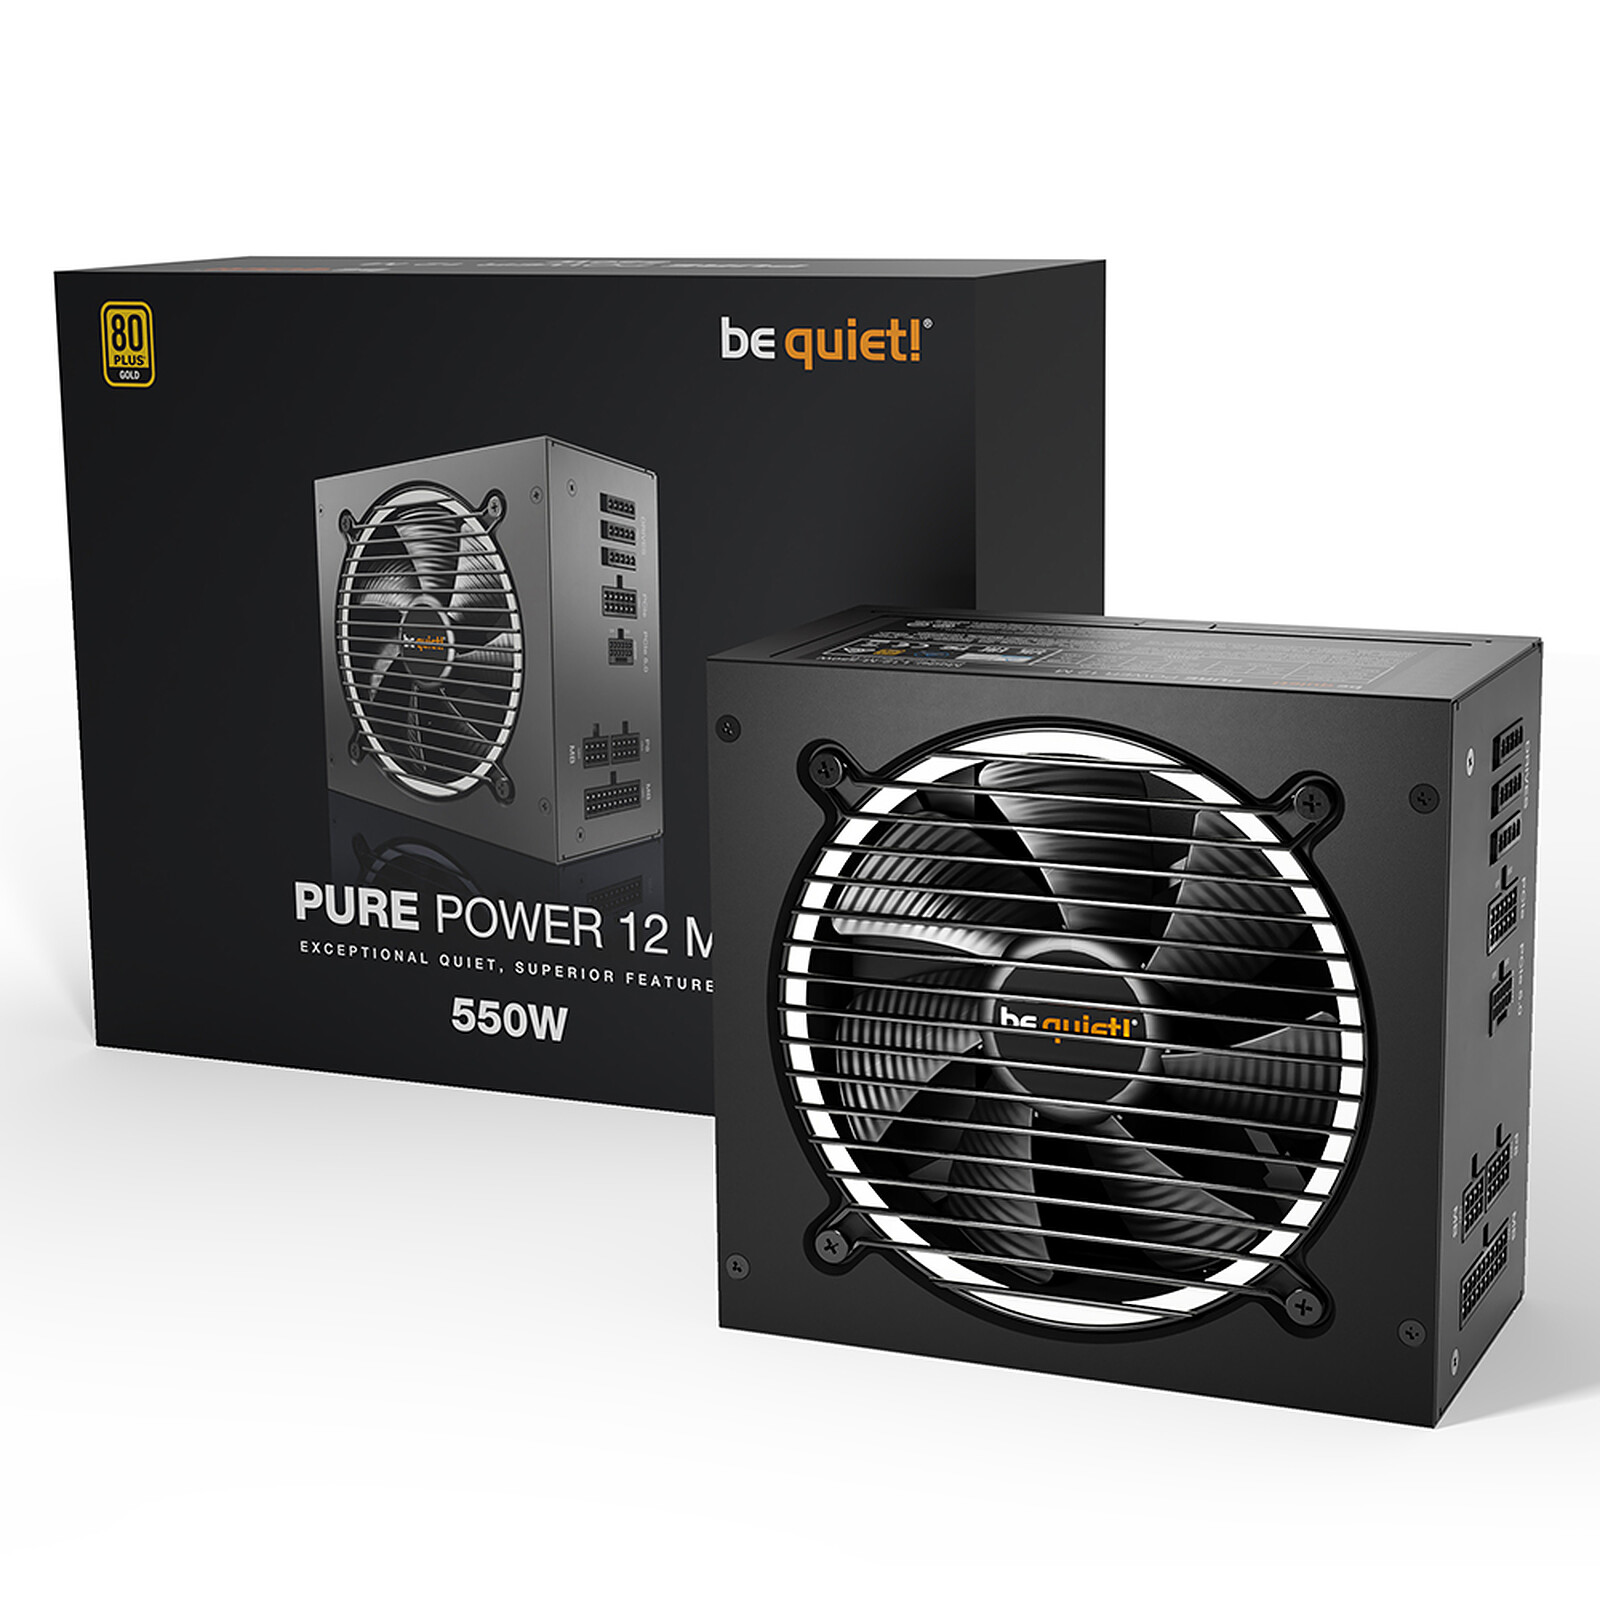 be quiet! Pure Power 11 FM 850 W Review